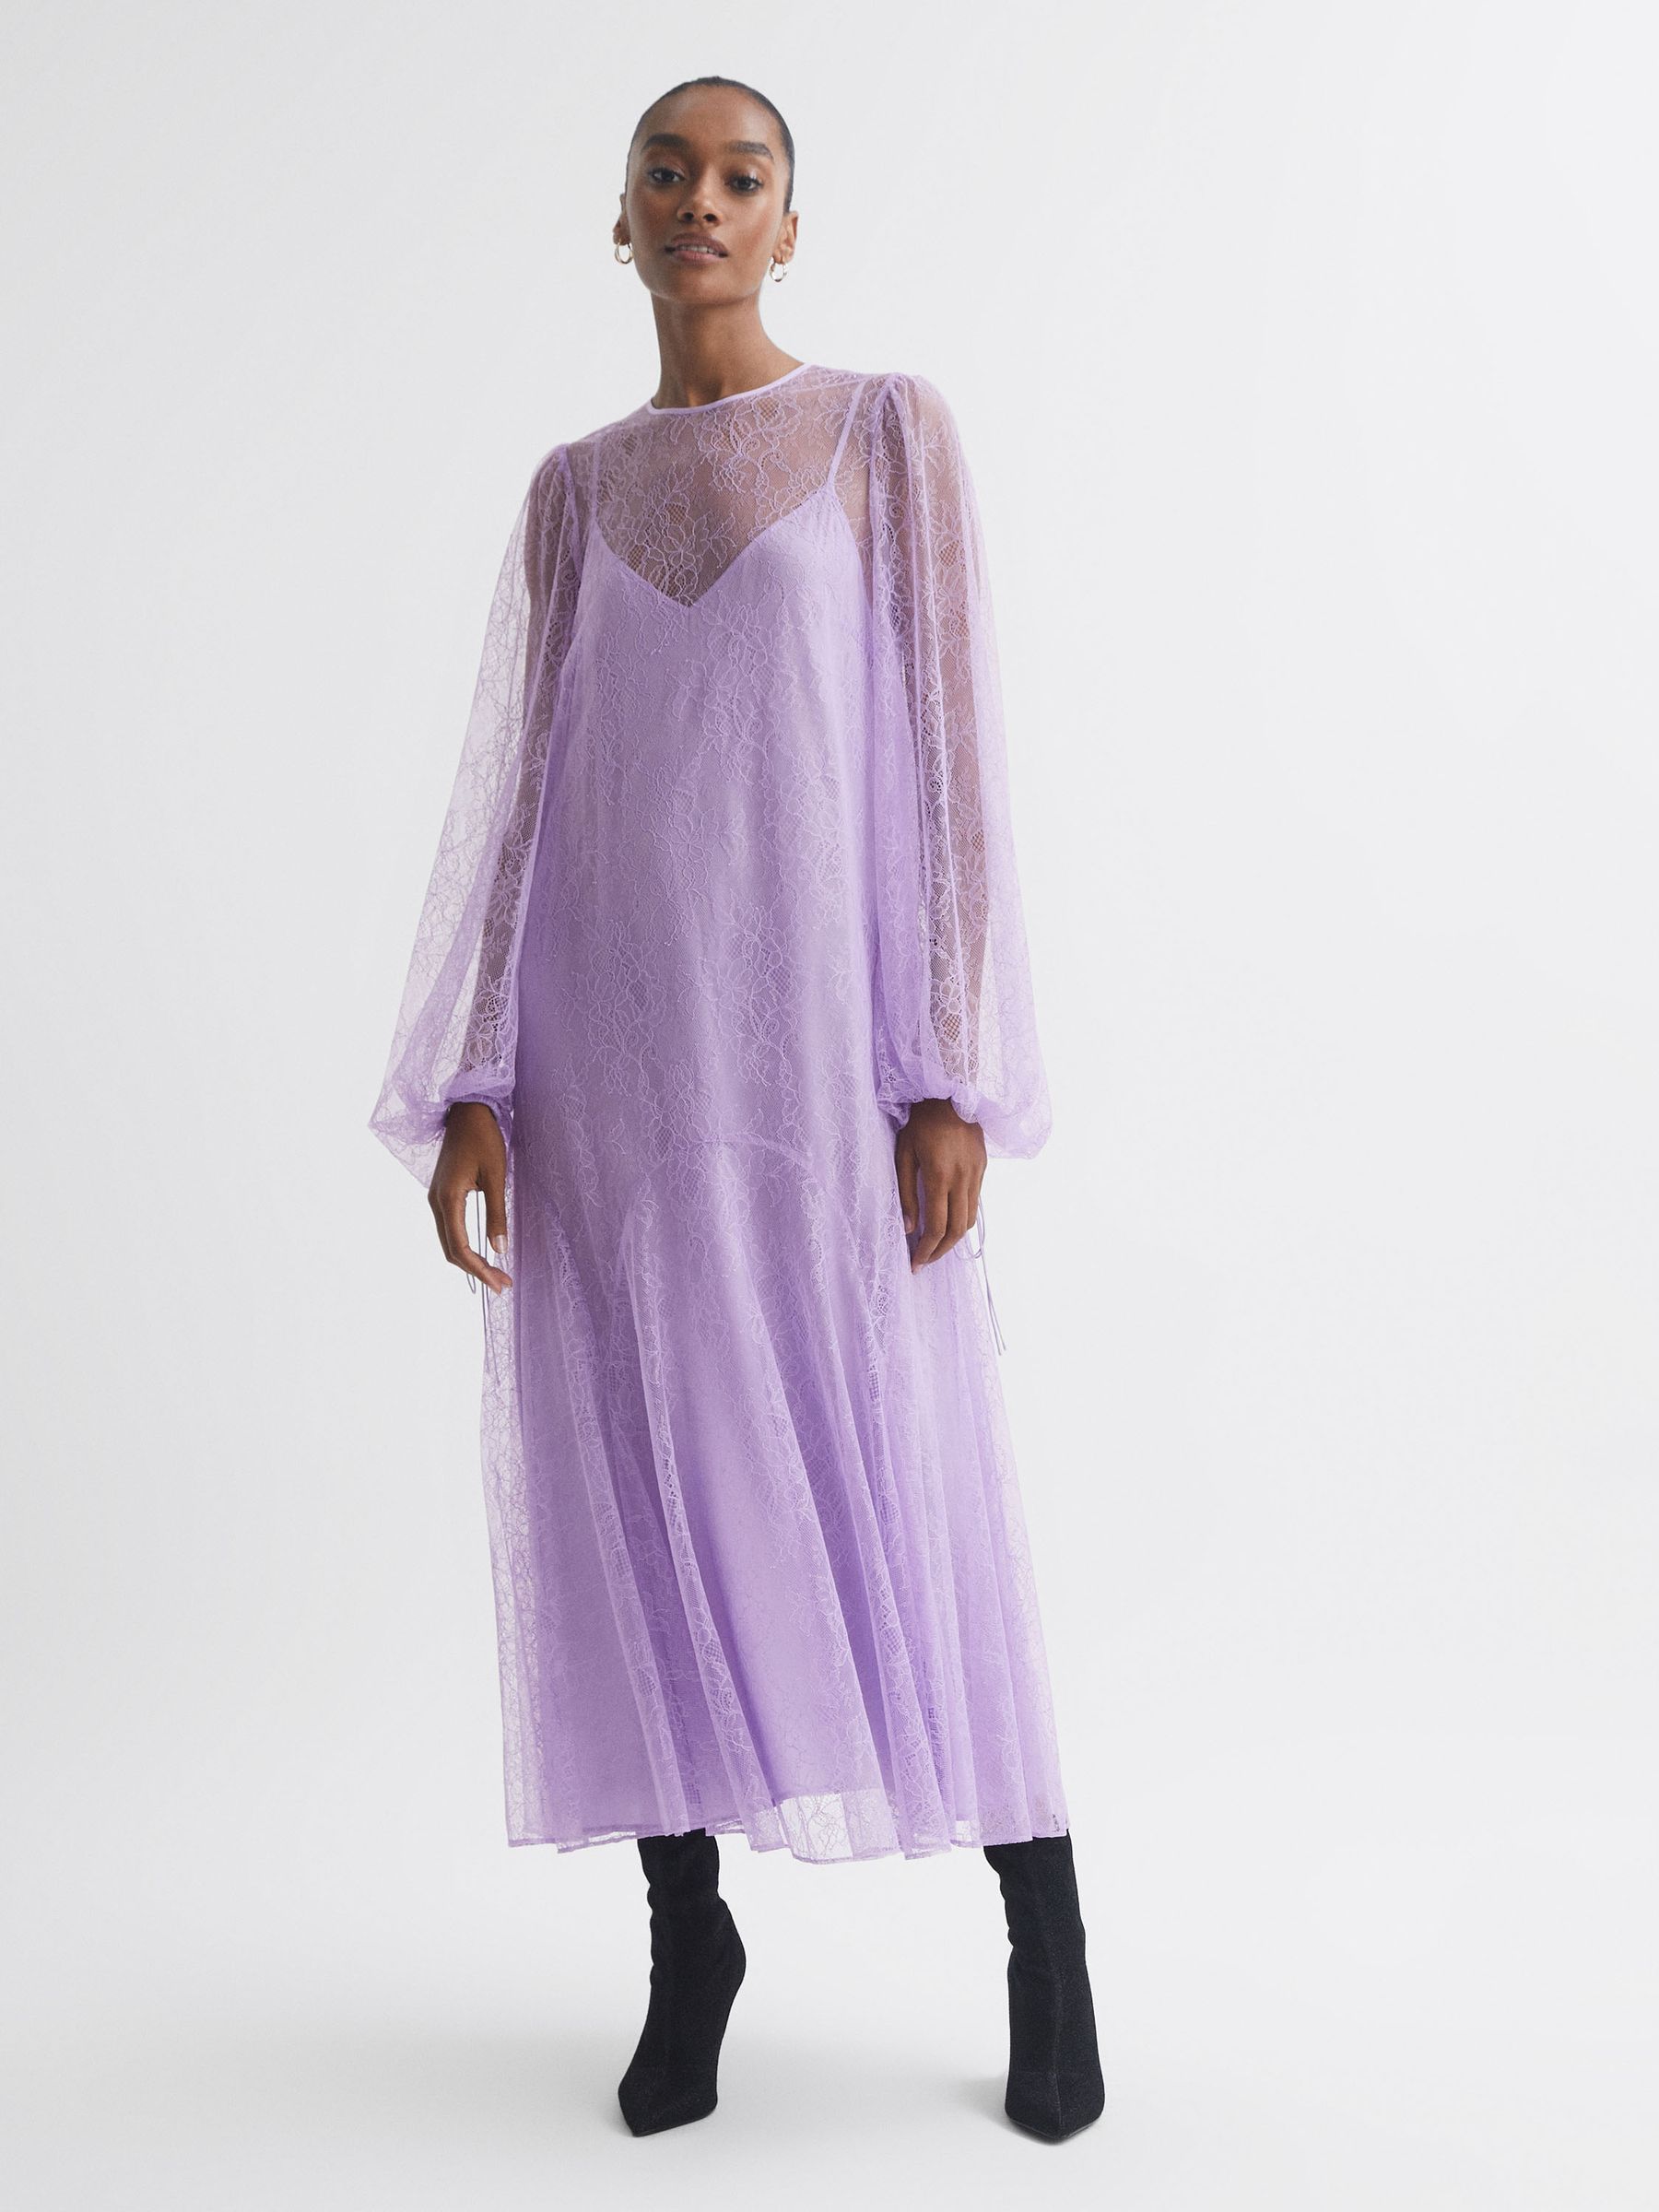 Florere Lace Midi Dress in Lilac - REISS